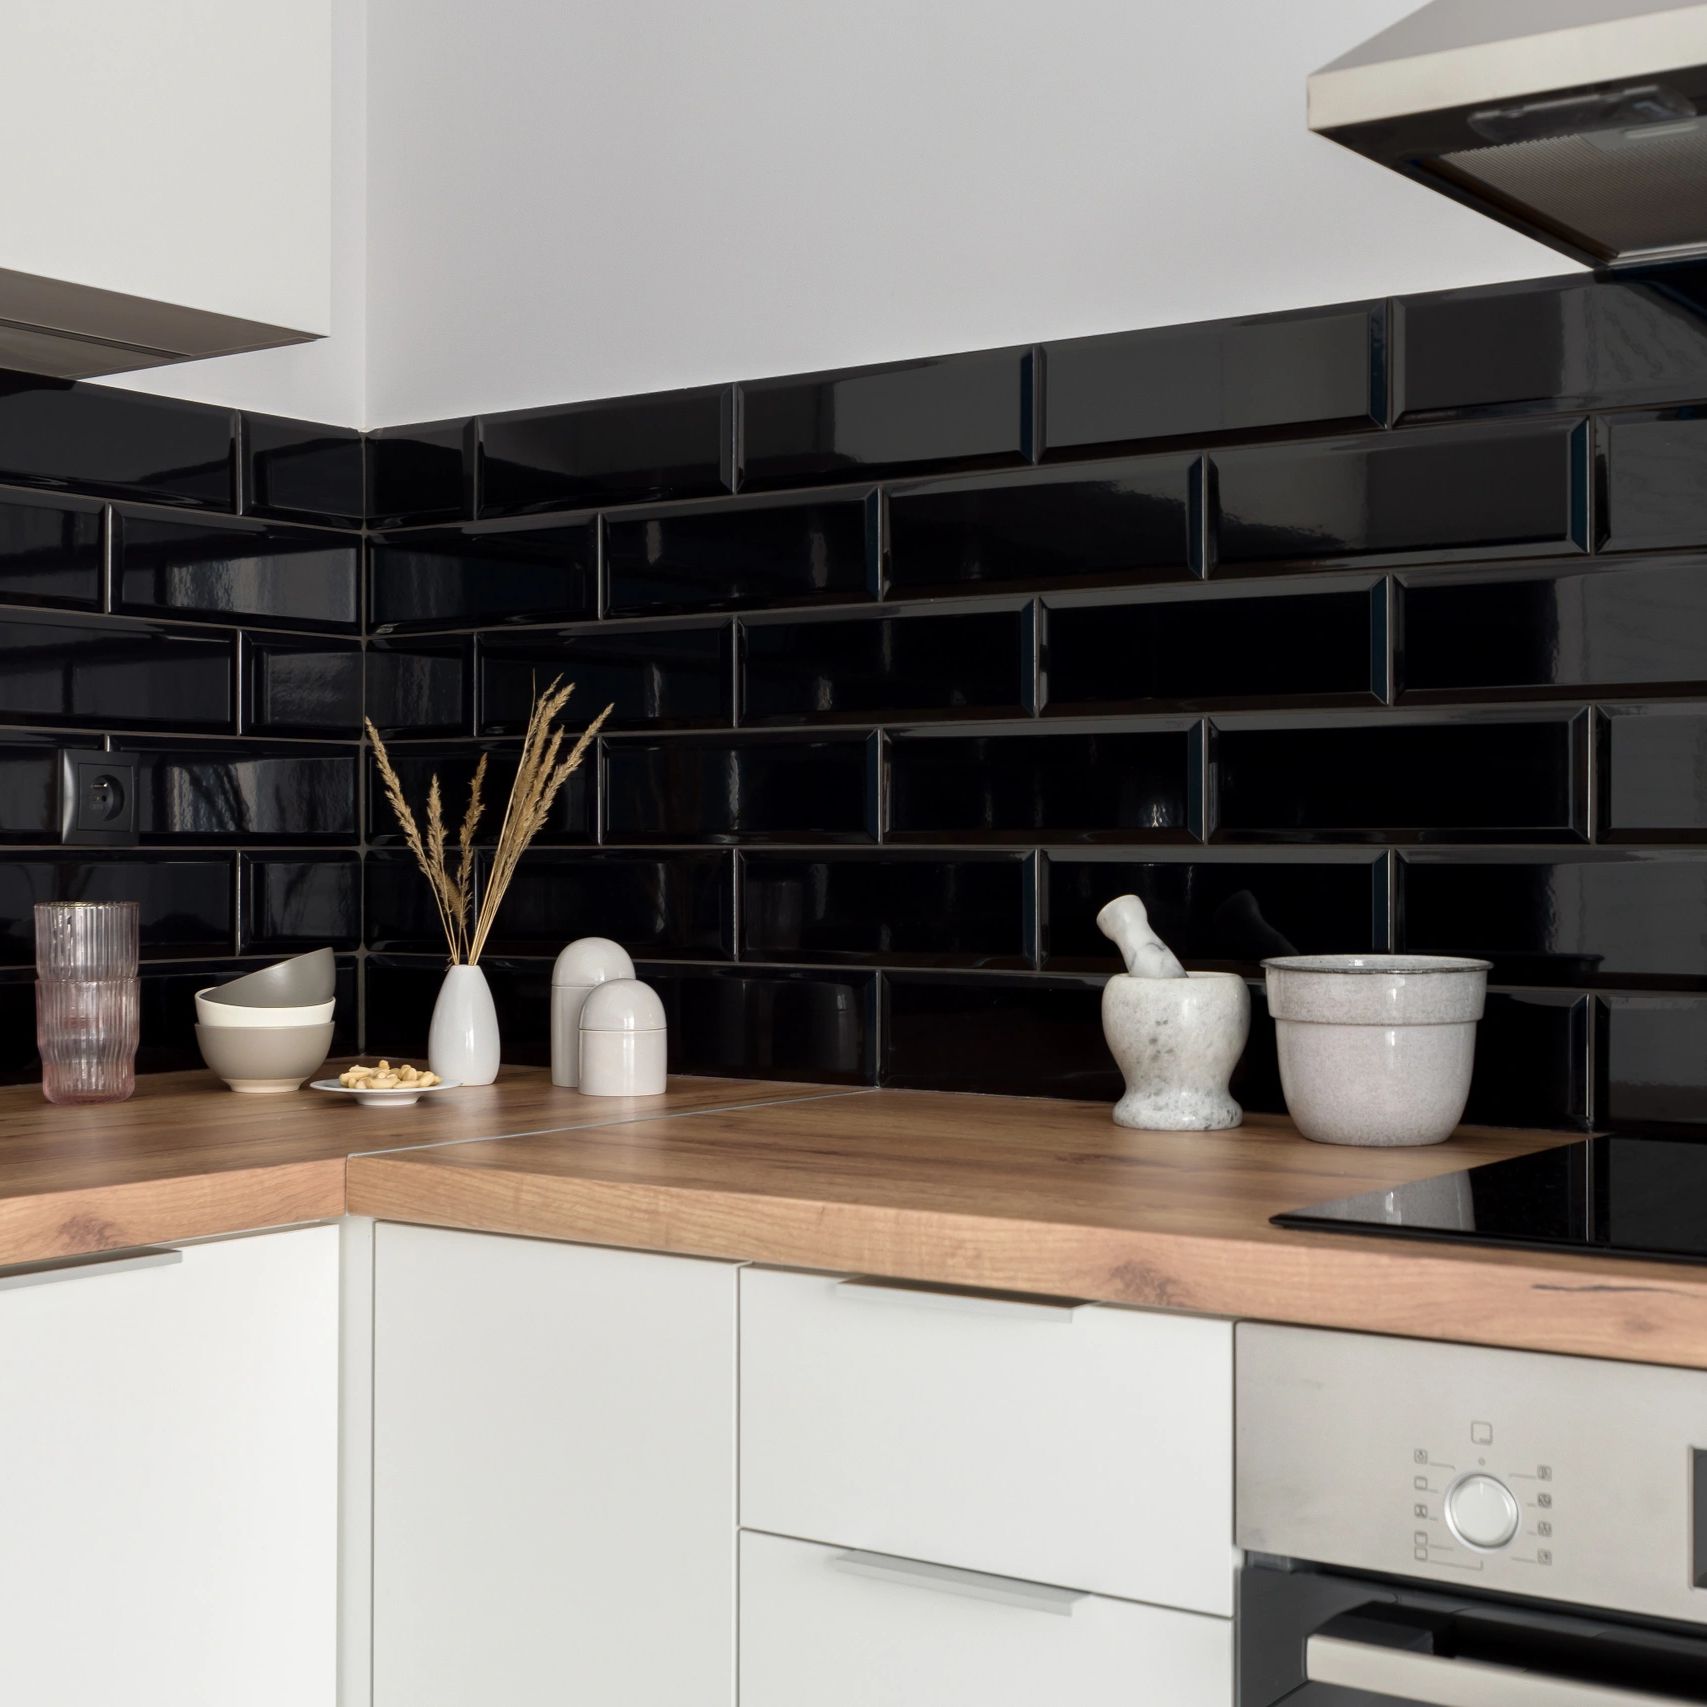 Stylish decoration on wooden countertops in small kitchen with black wall tiles.
